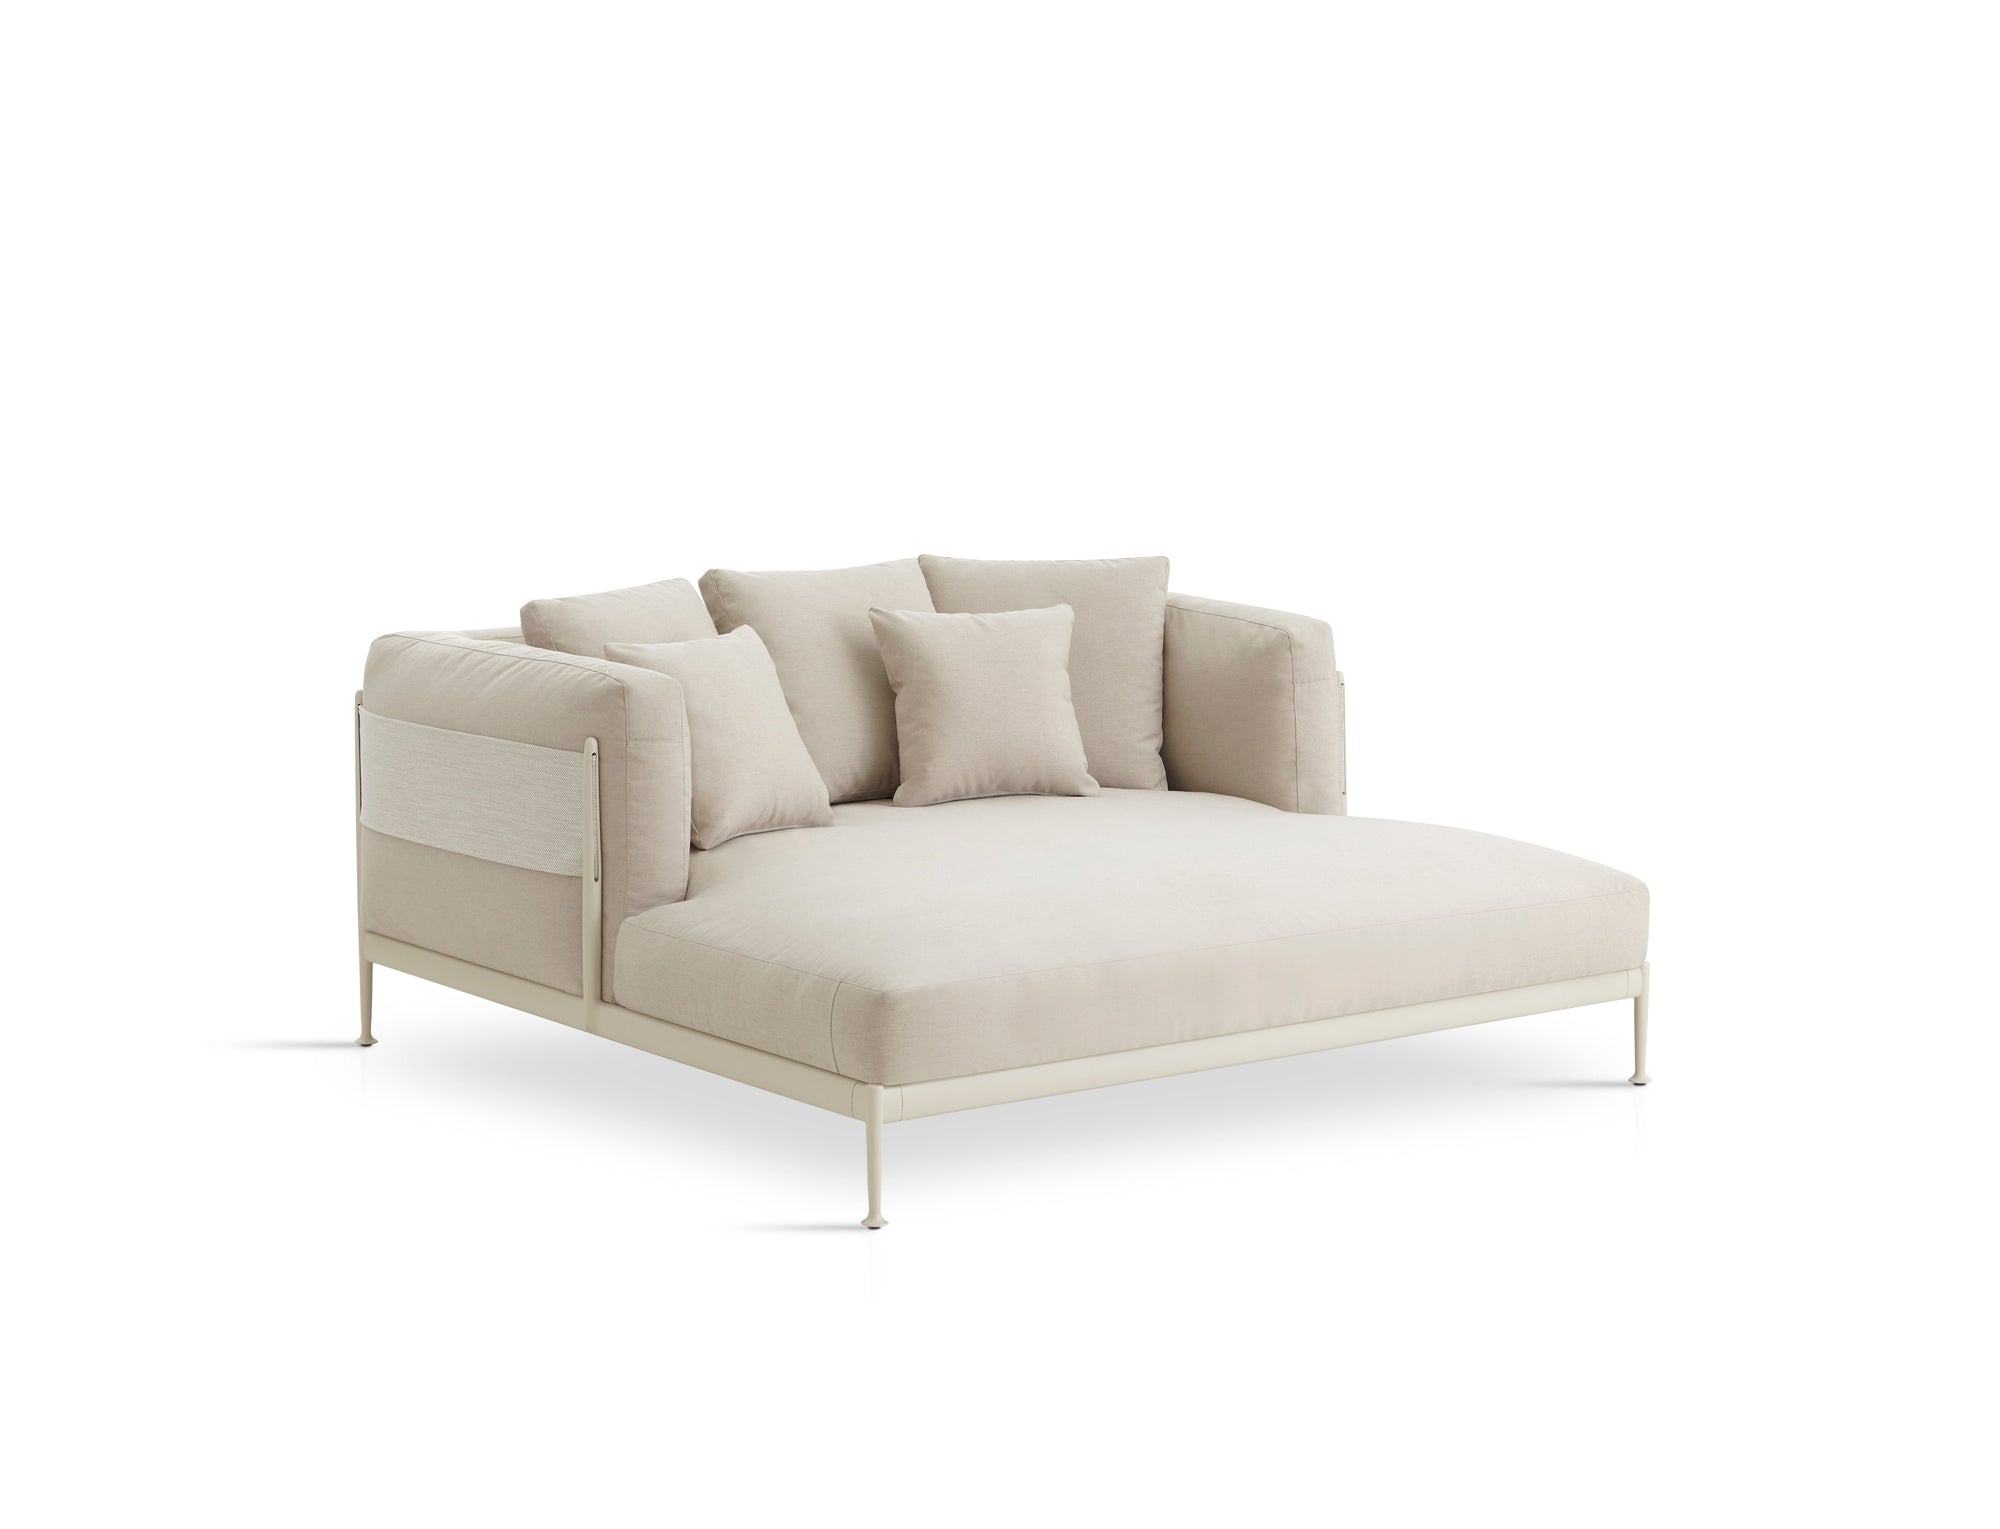 Obi C082 Daybed-Expormim-Contract Furniture Store